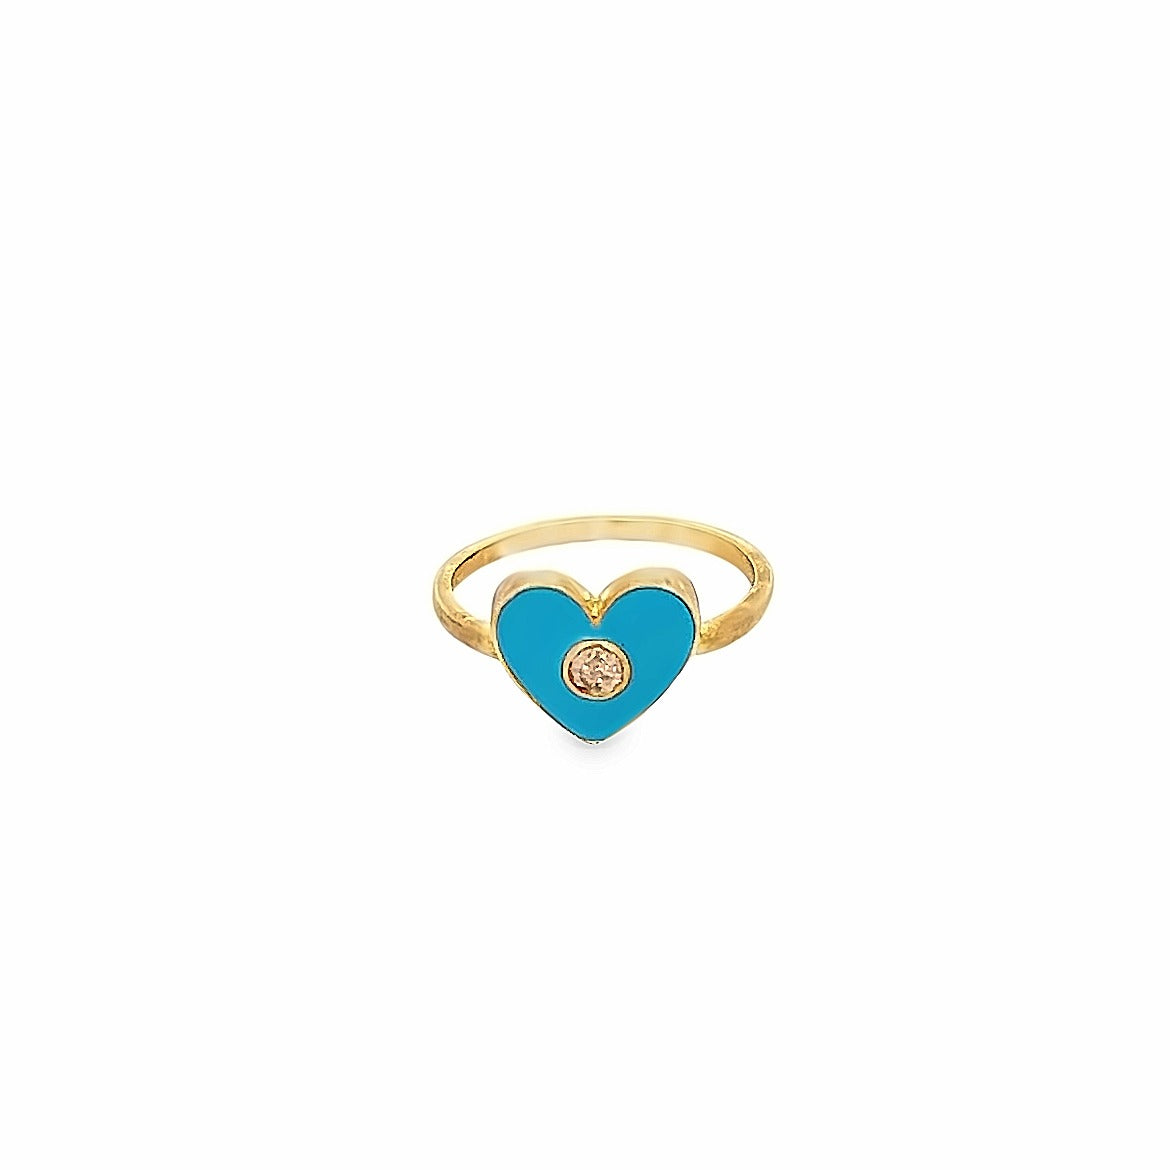 925 SILVER GOLD PLATED BABY BLUE ENAMEL HEART RING